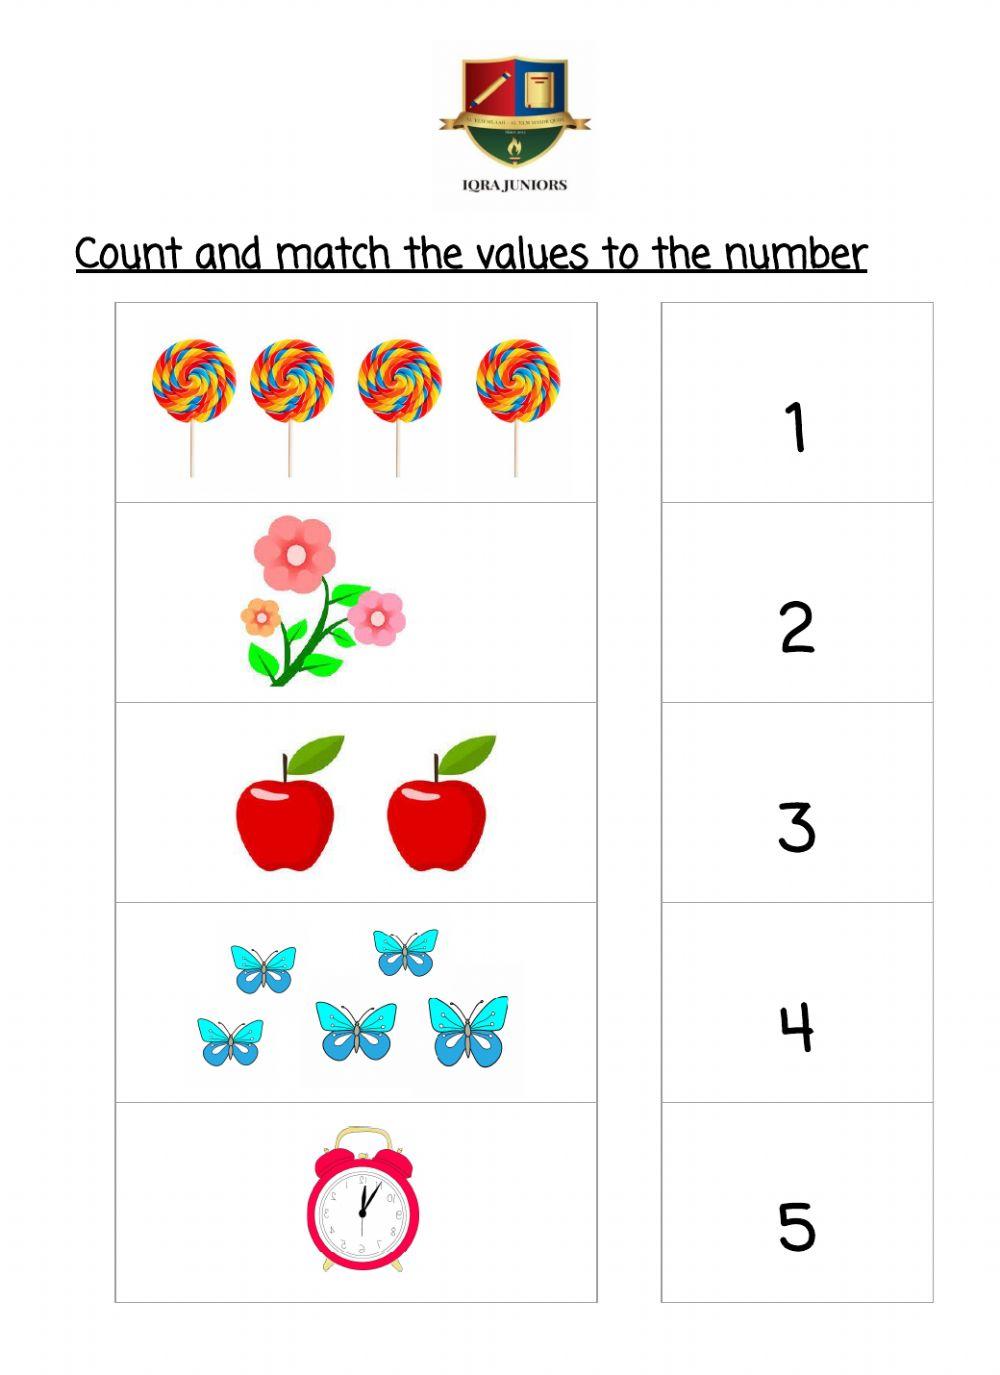 Count and match the values with the number.